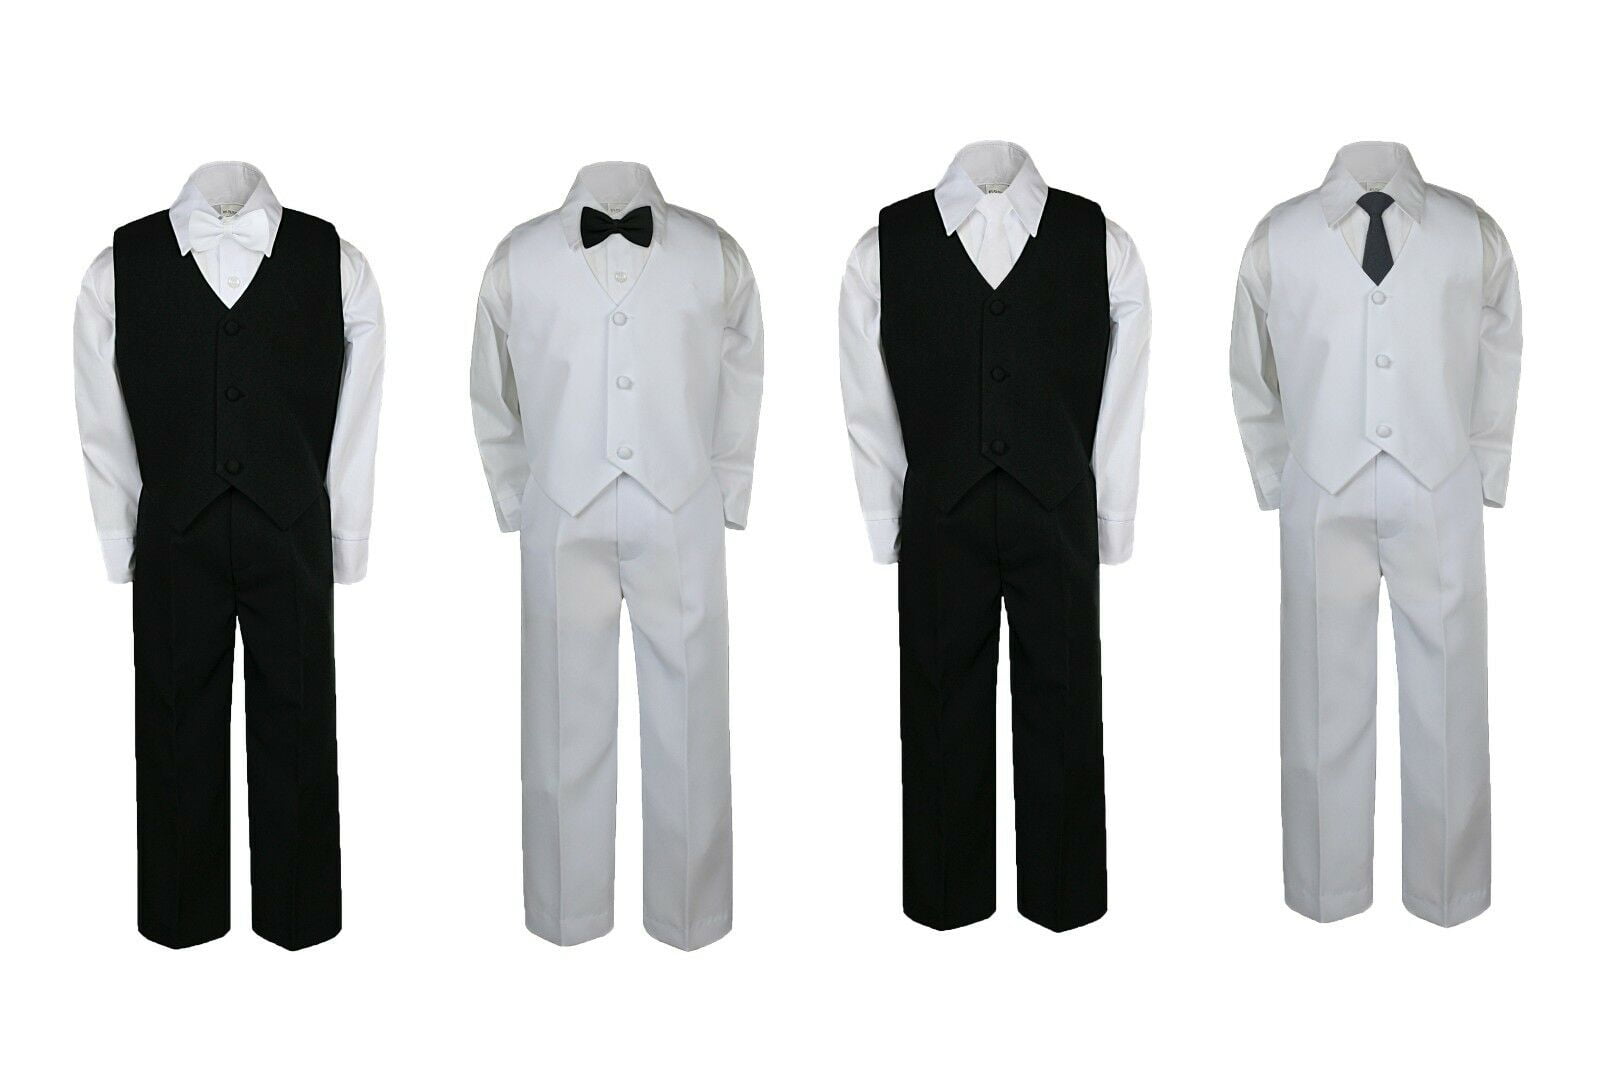 Baby Toddler kids Teen Boys Wedding Party Formal 4pc Vest Suits set Silver S-20 